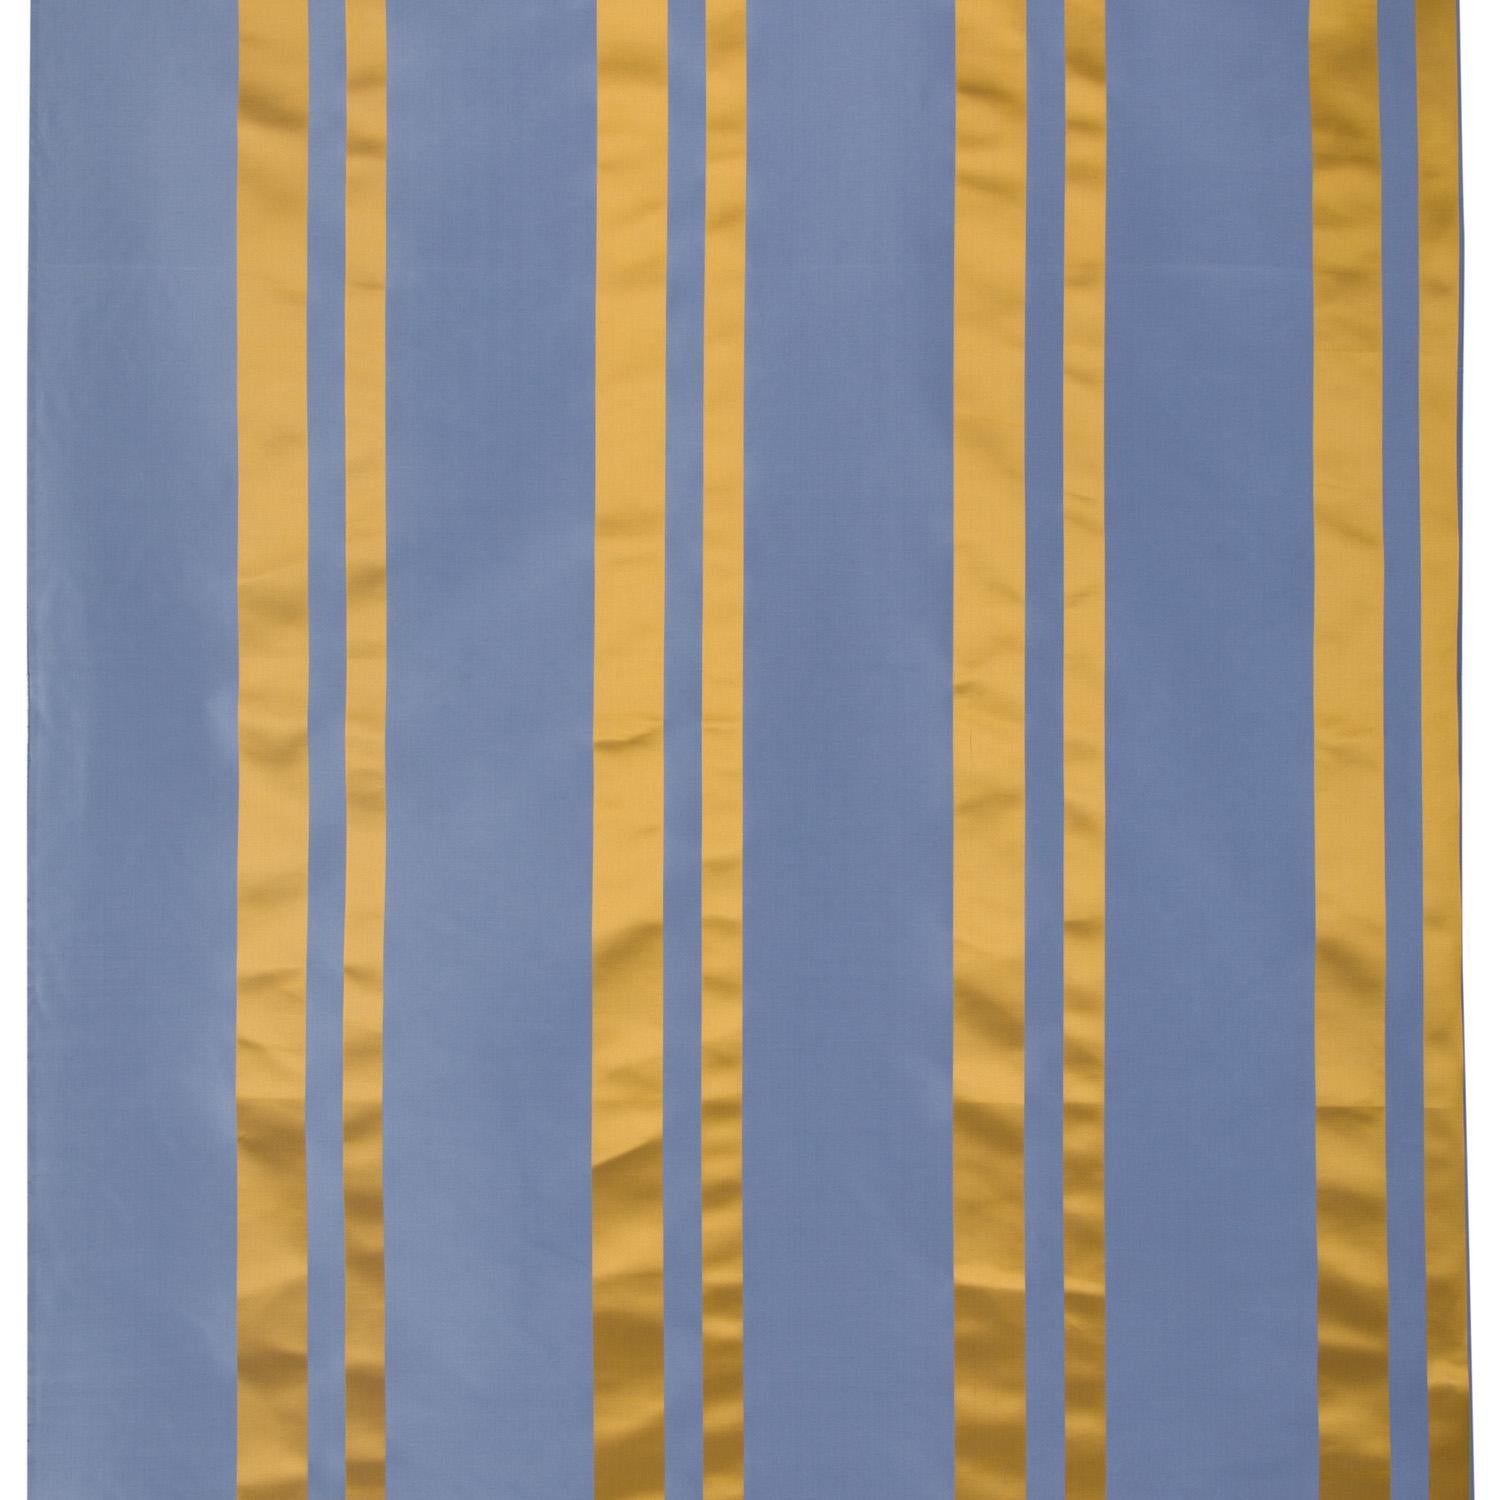 This is a semi mechanical Le Roy fabric with a grosgrain back and satin stripes. It is woven on an original loom from the 1850s. The Le Roy fabric belongs to the Antico Setificio Fiorentino archives. This fabric can be used for light upholstery such